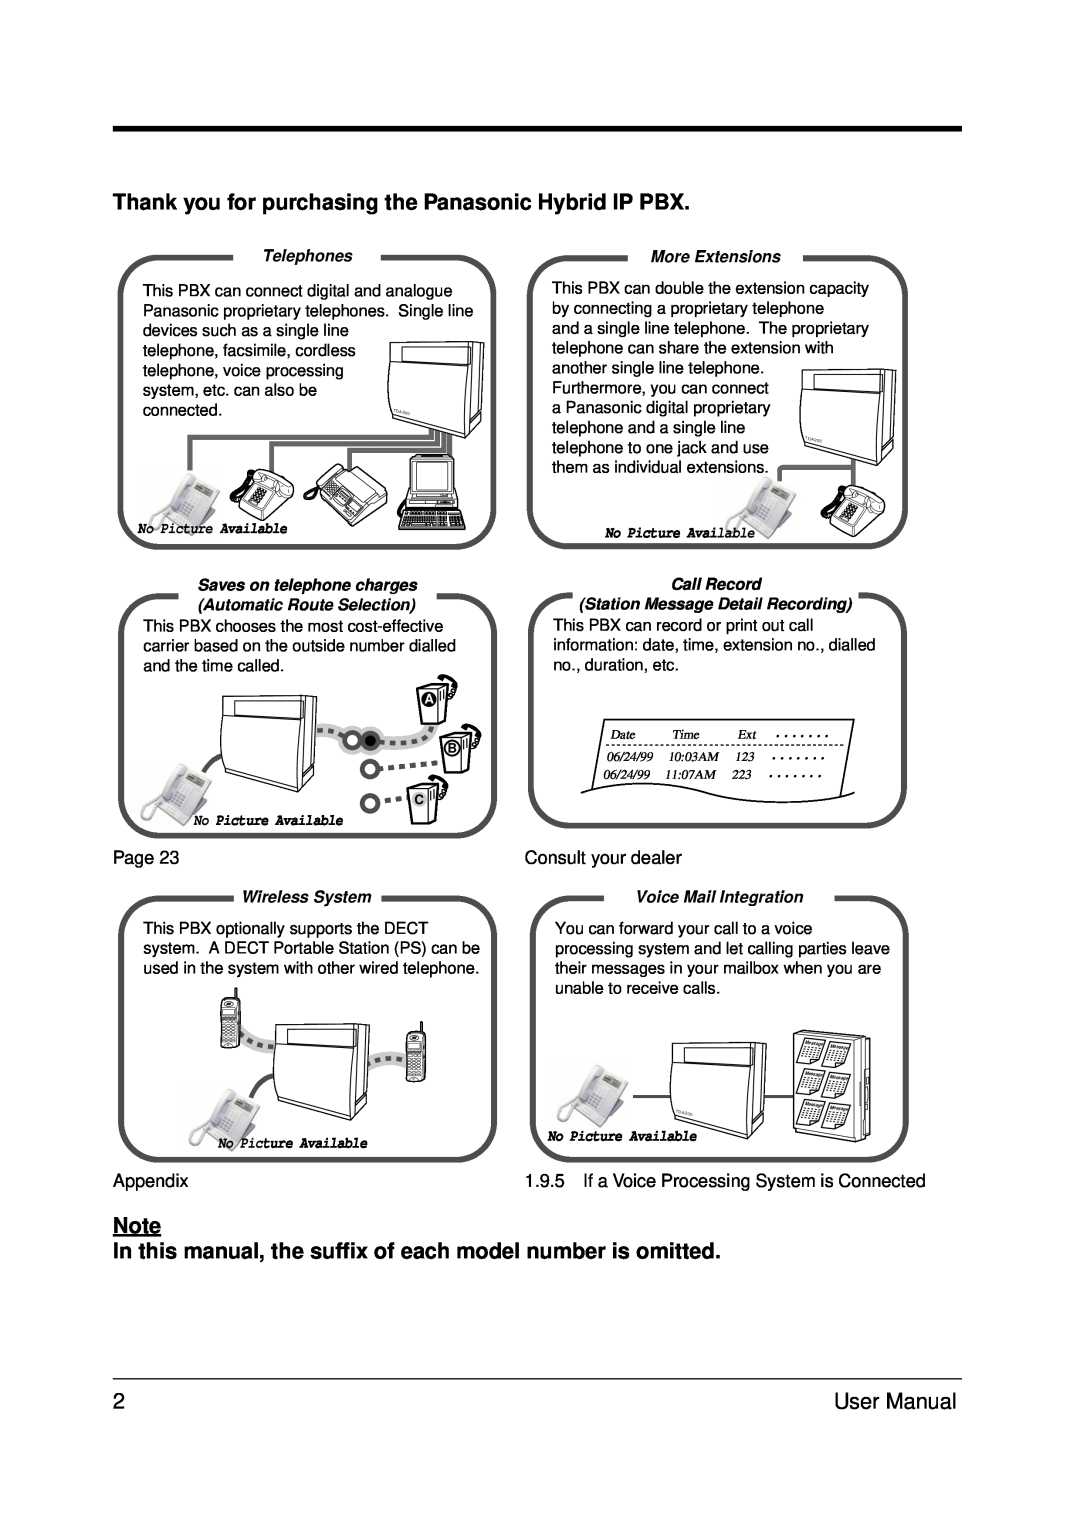 Panasonic KX-TDA200 user manual Page, Consult your dealer, Appendix, 1.9.5If a Voice Processing System is Connected 